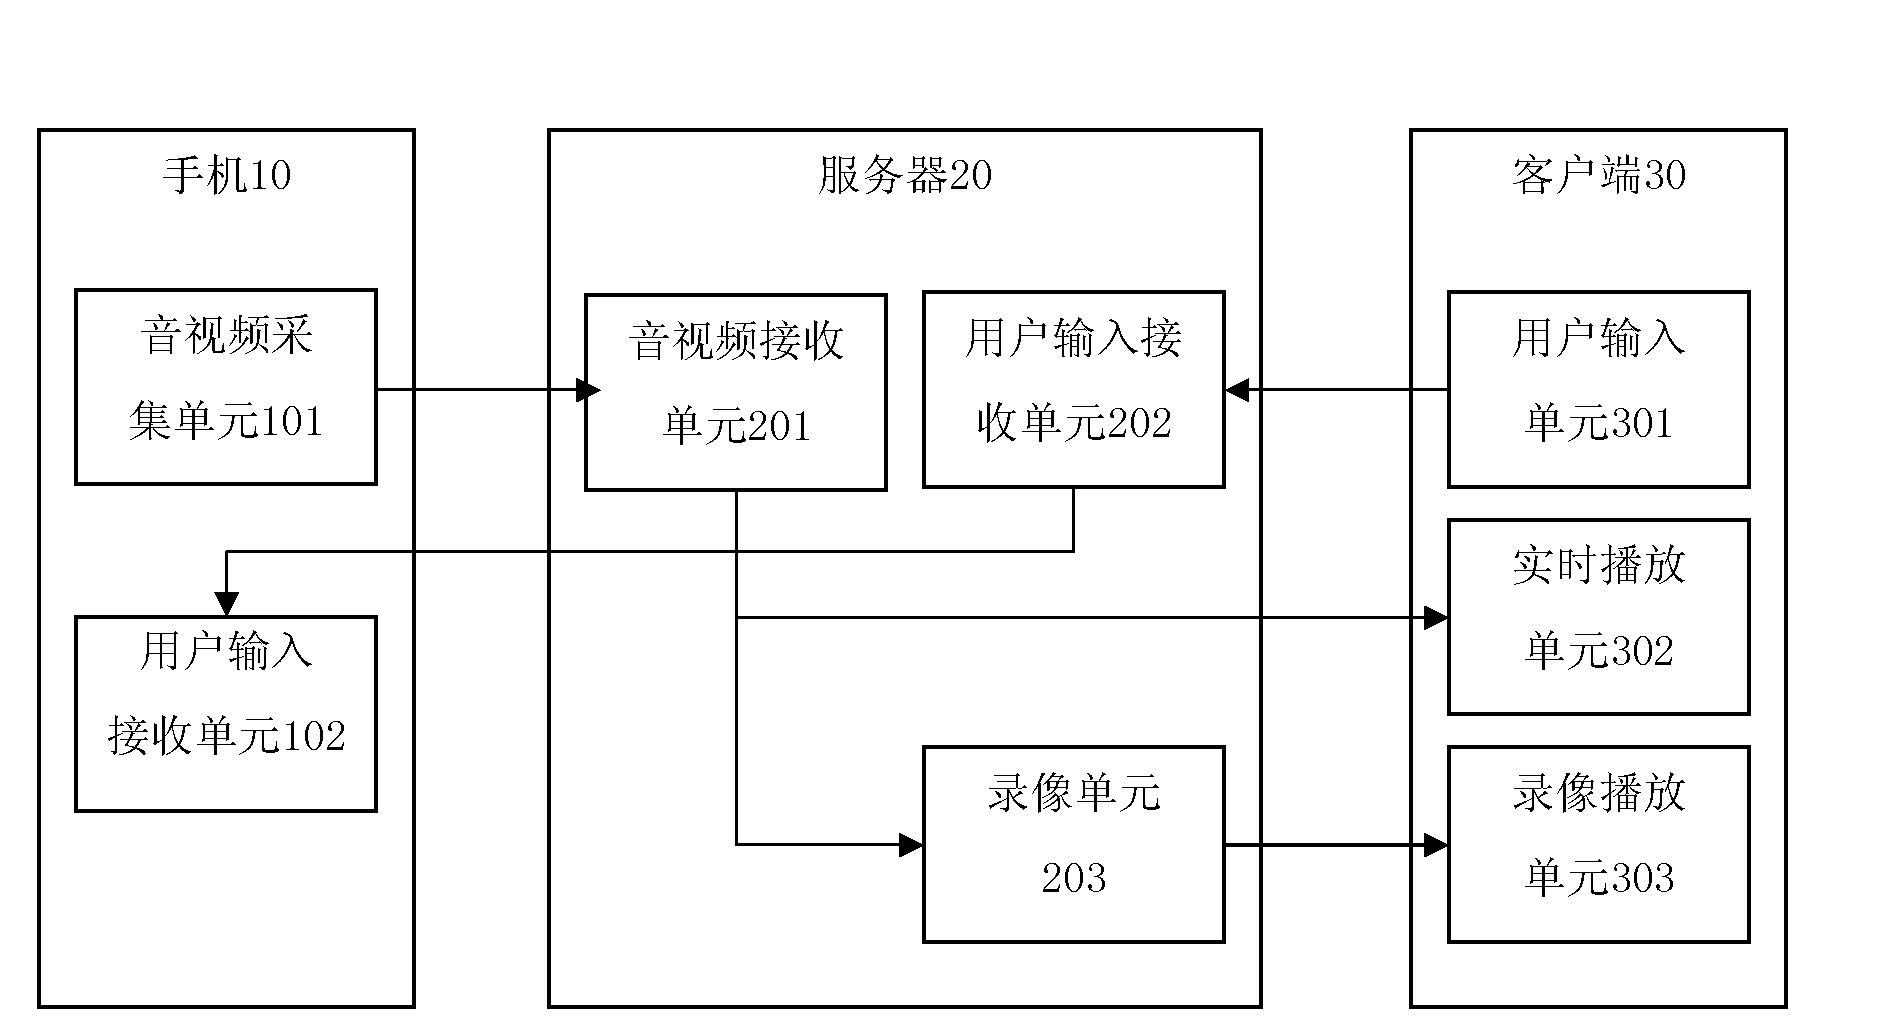 Auxiliary test method, device and system for remote real machine